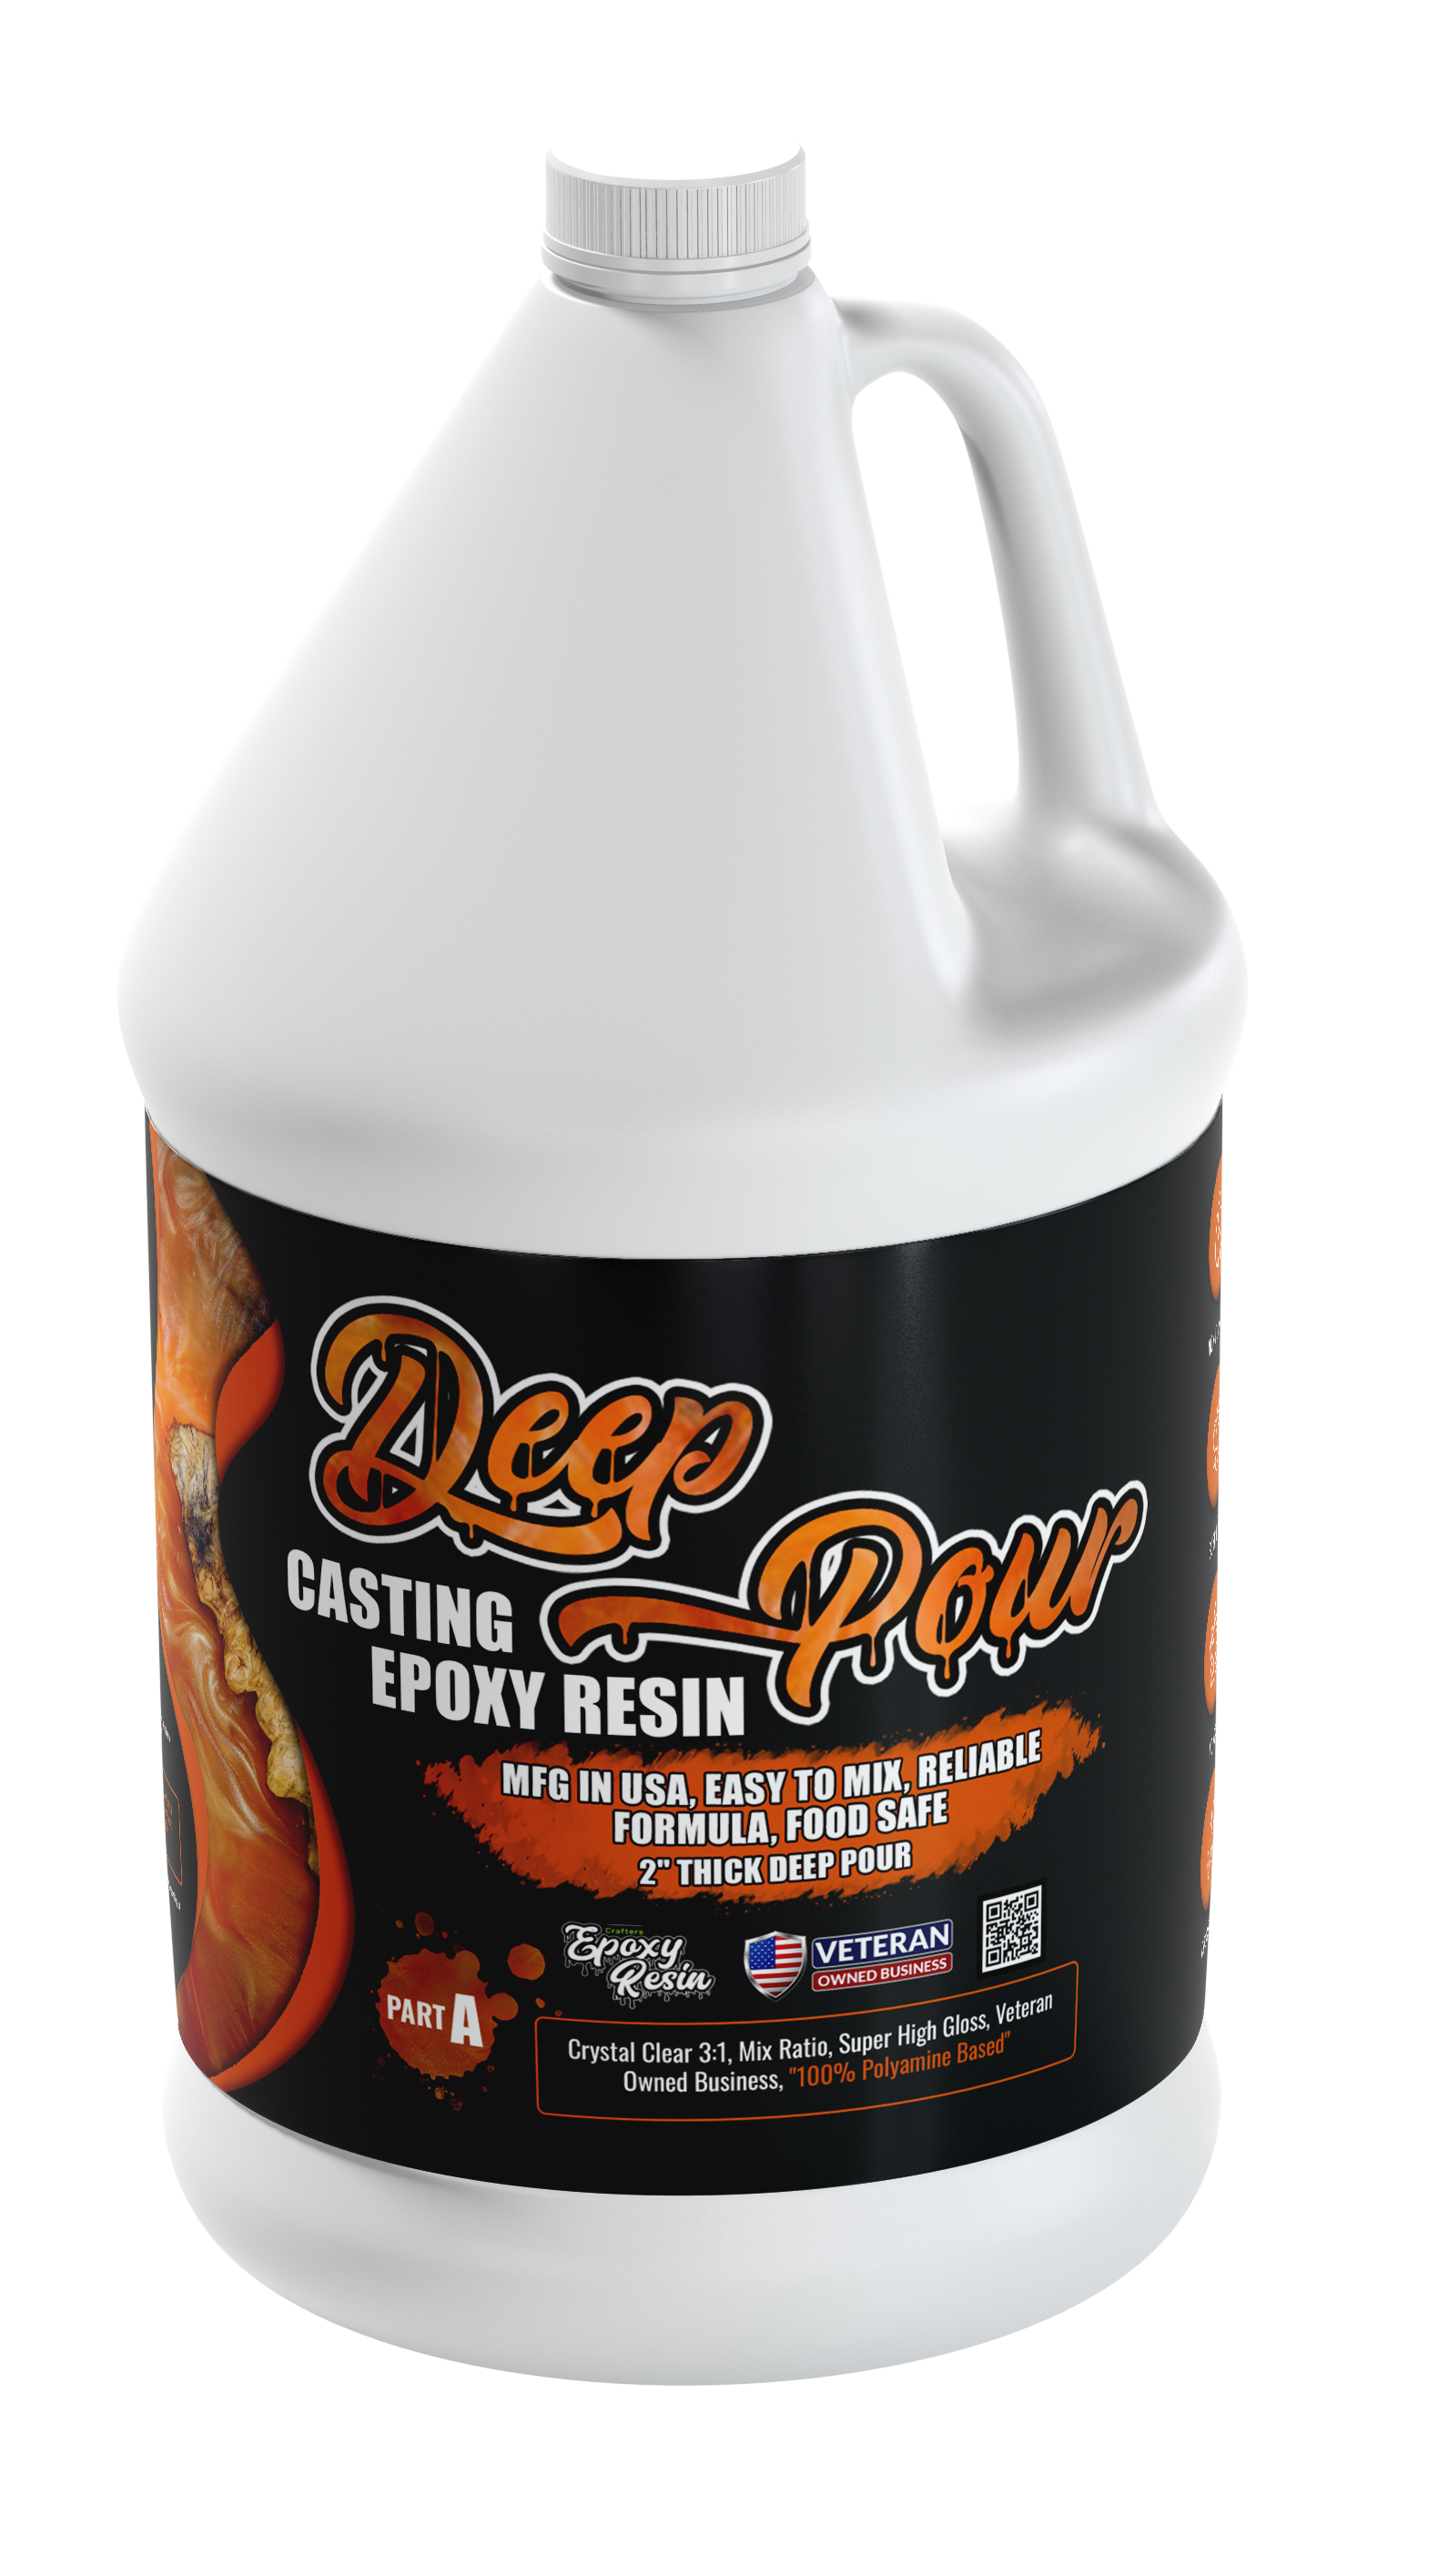 Crafters Deep Epoxy for custom wood working, river tables and encapsulations | Clear